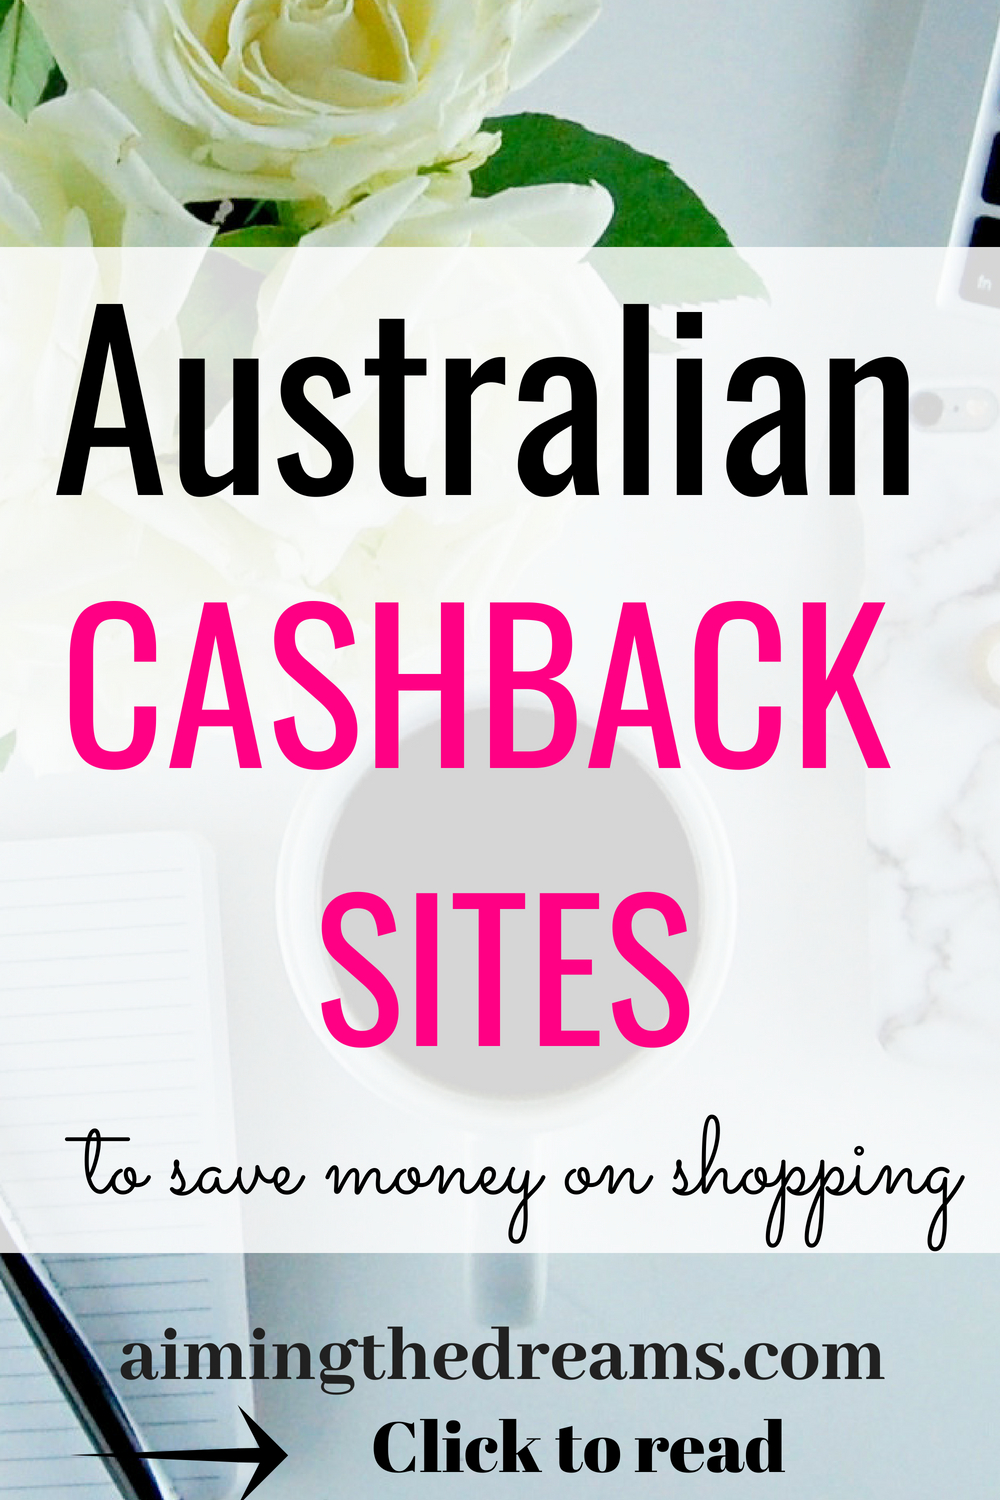 #Casback sites to #save #money on #shopping in #Australia. click to read. These helps in saving money while shopping online.